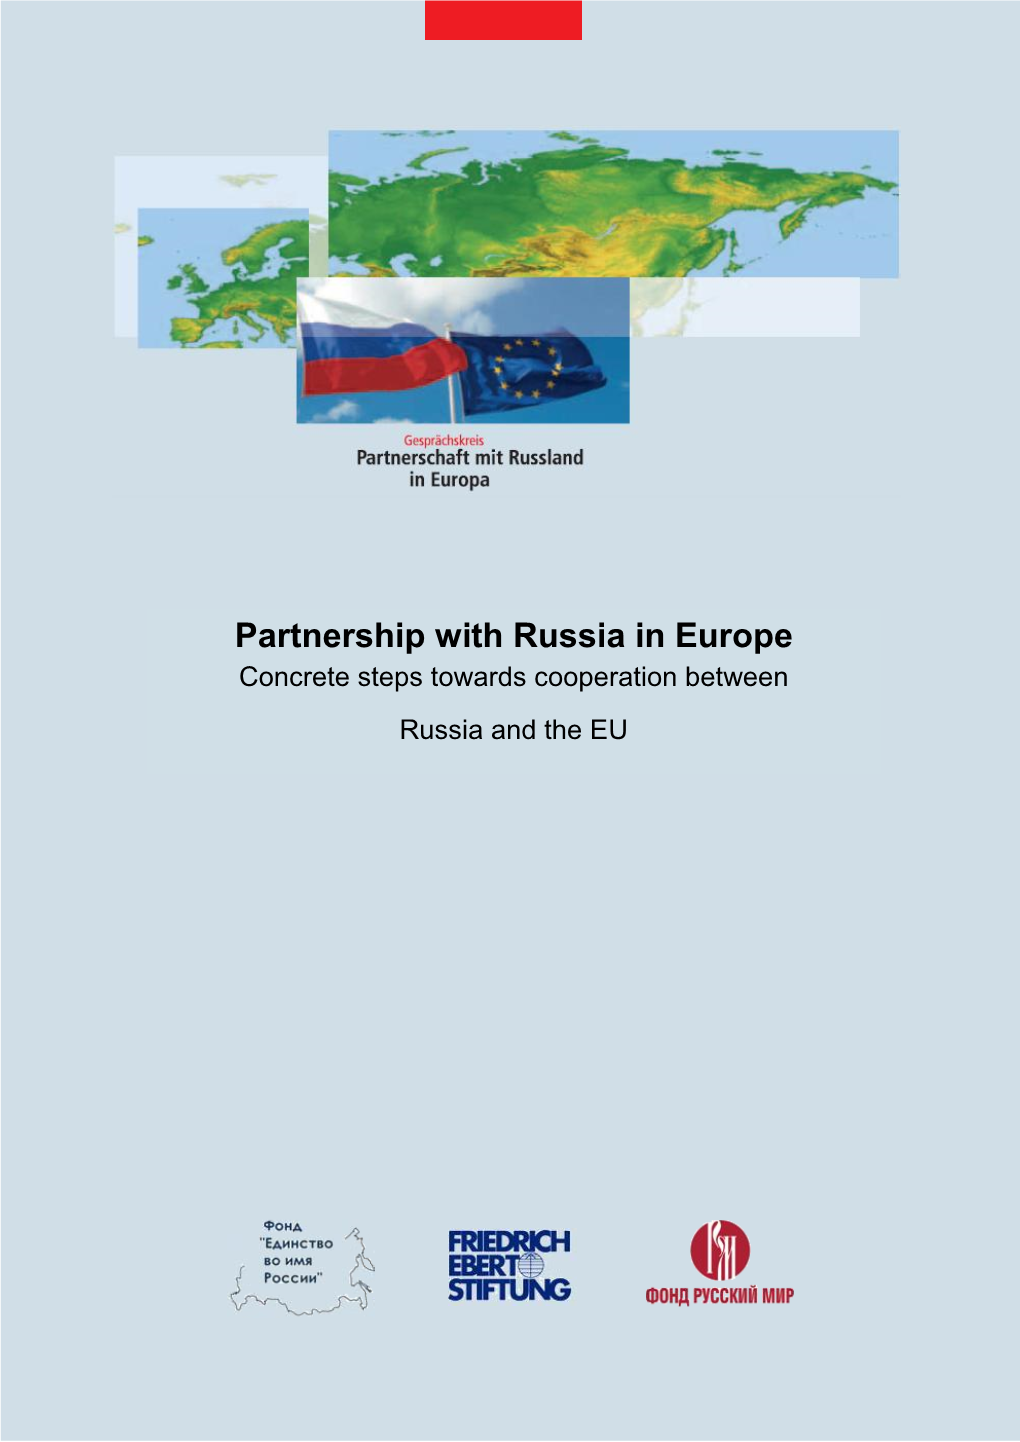 Concrete Steps Towards Cooperation Between Russia and the EU